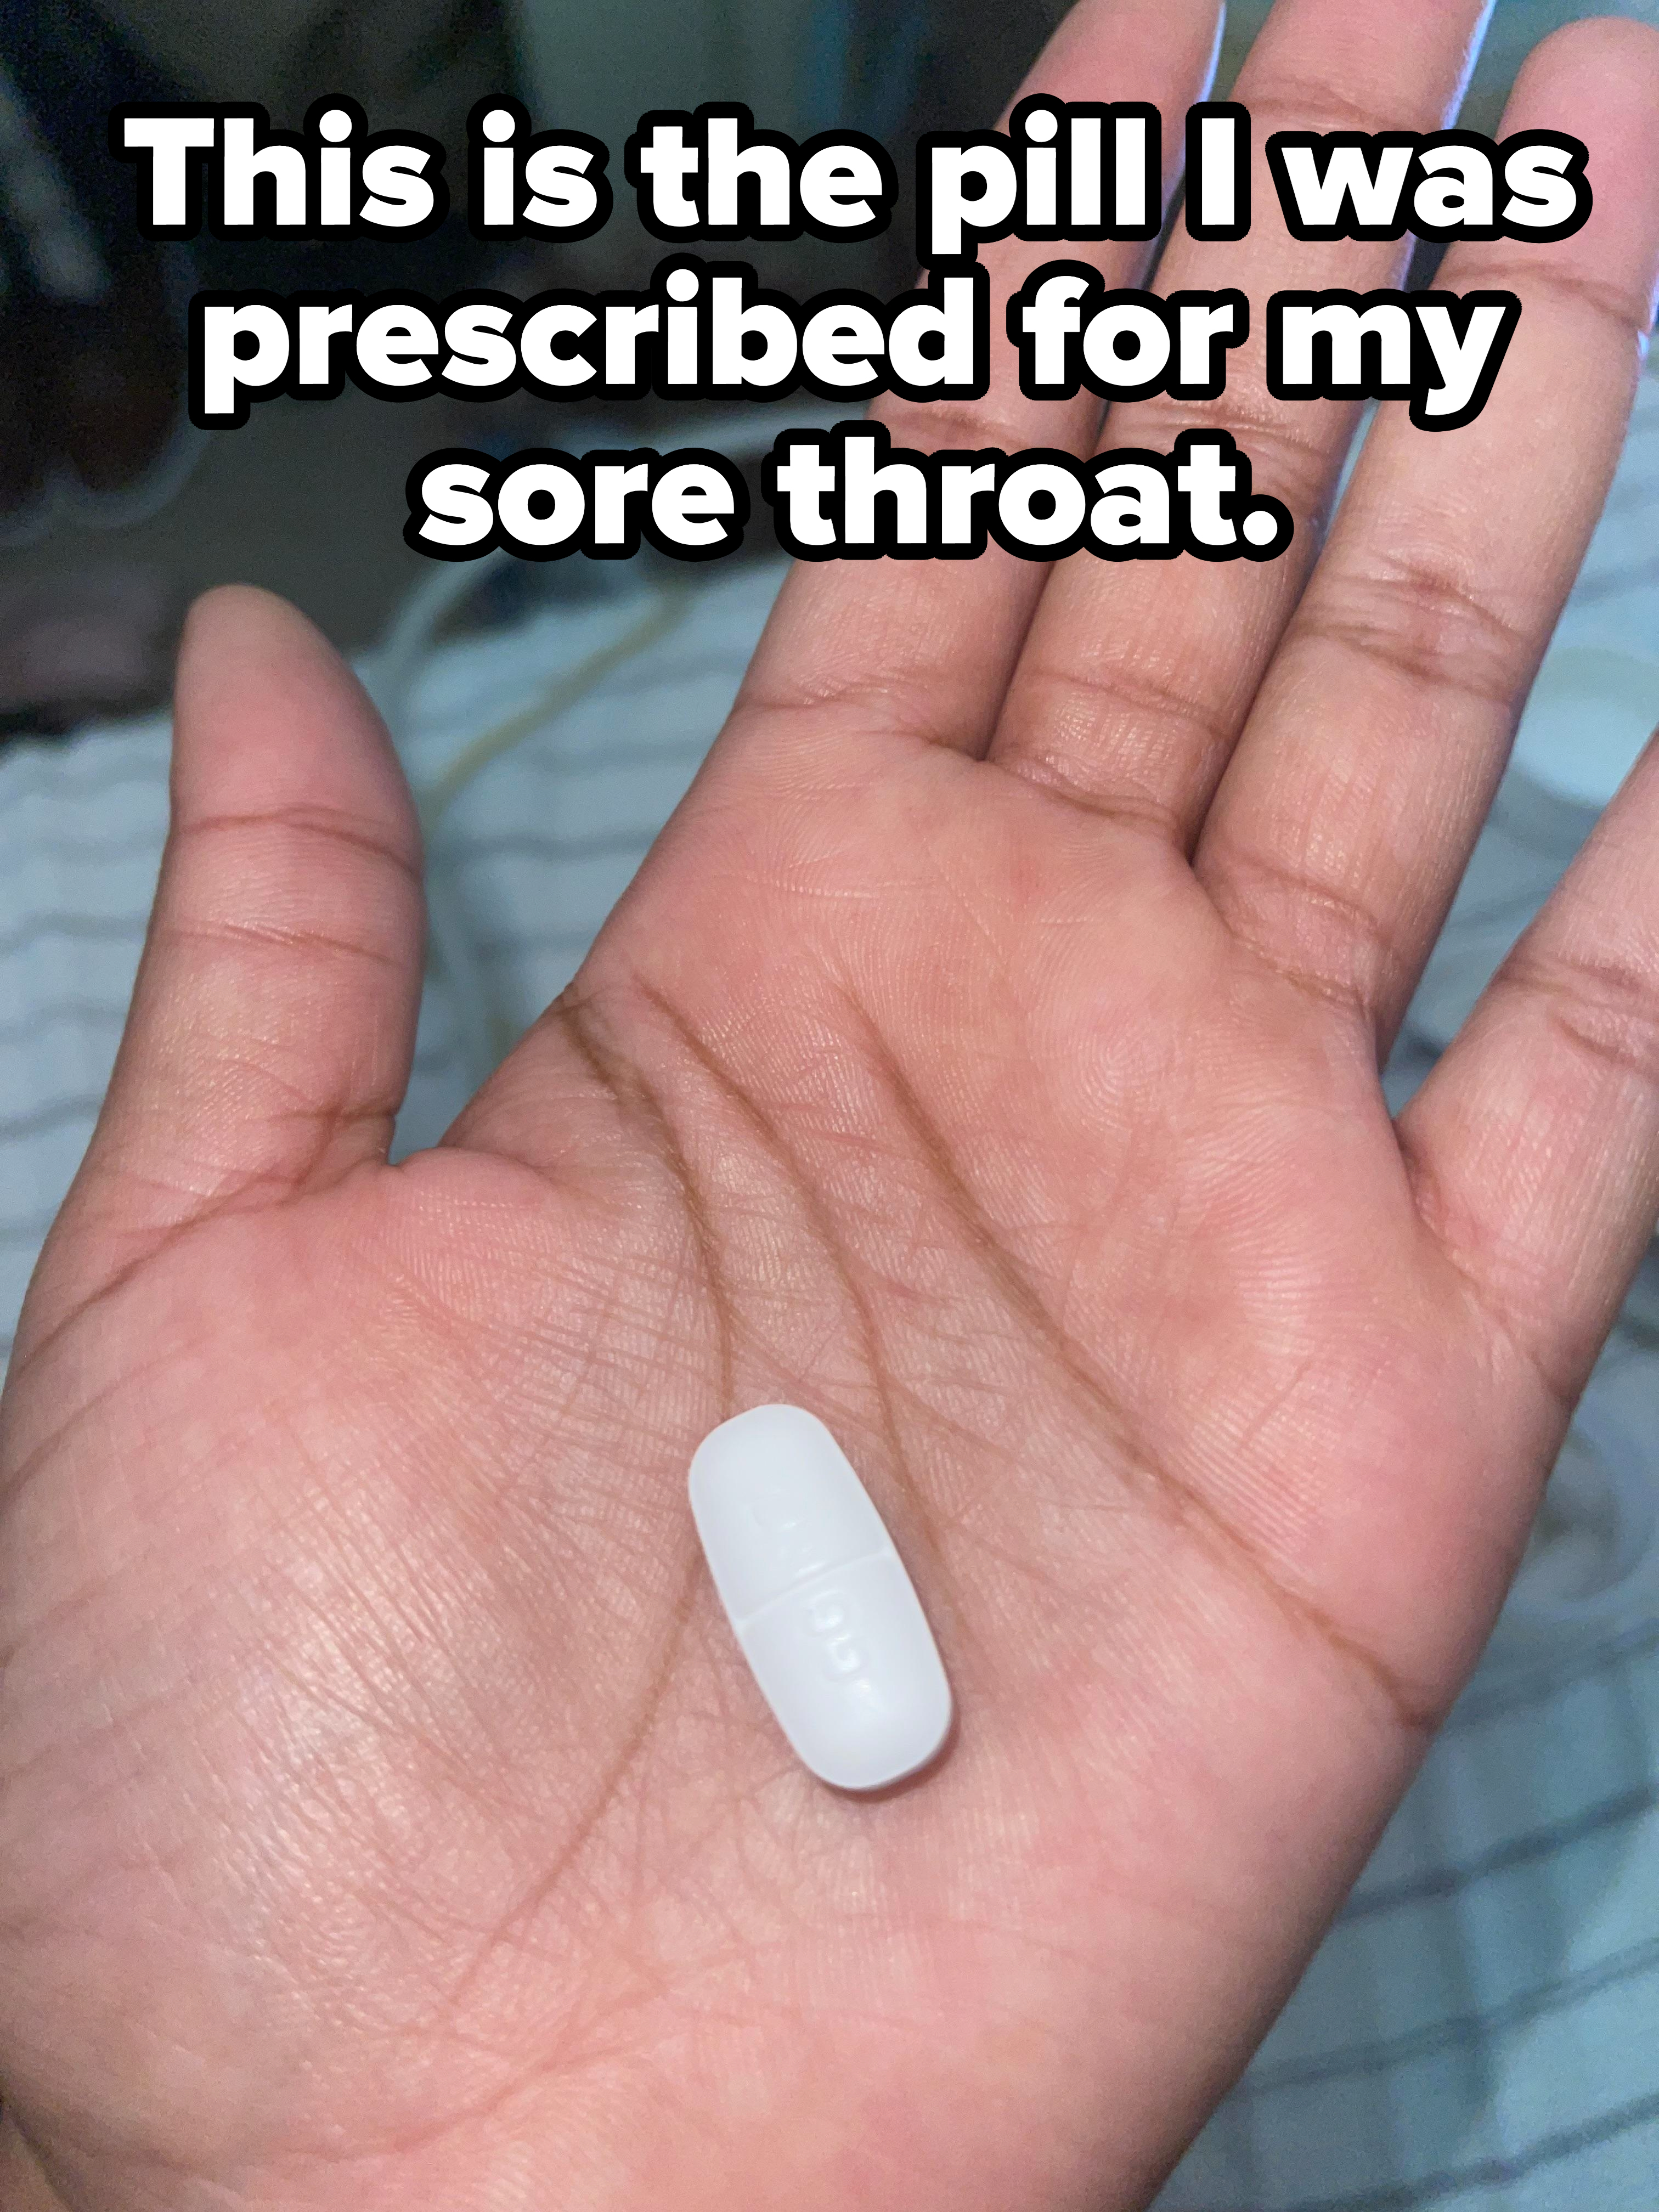 A huge pill in the palm of a hand with caption &quot;This is the pill I was prescribed for my sore throat&quot;